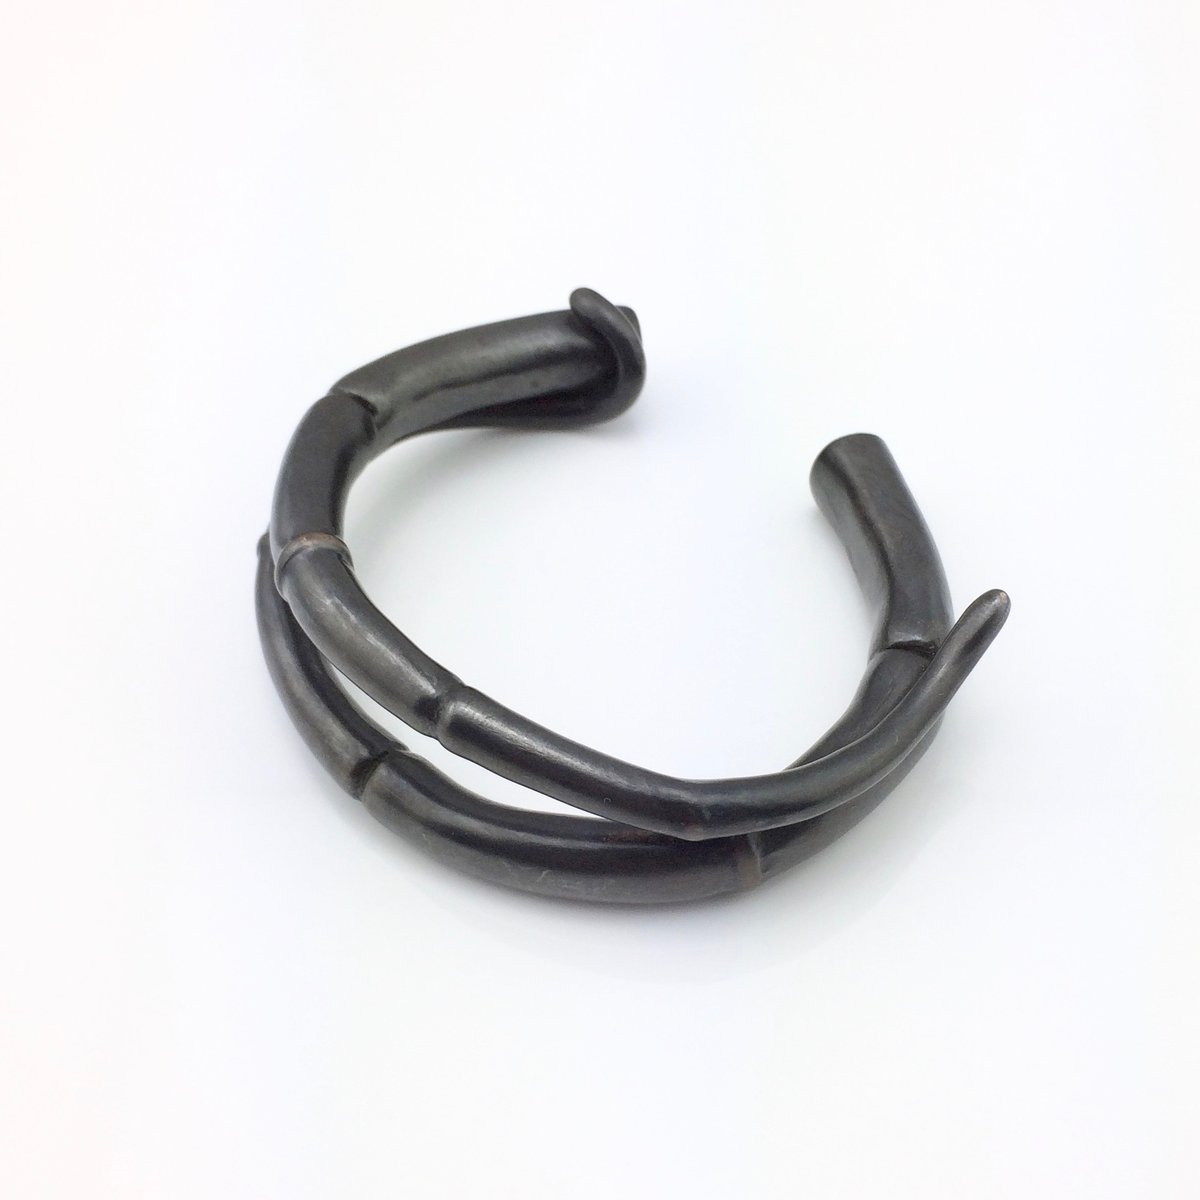 Image of Black Double Tendril Cuff Bracelet 02